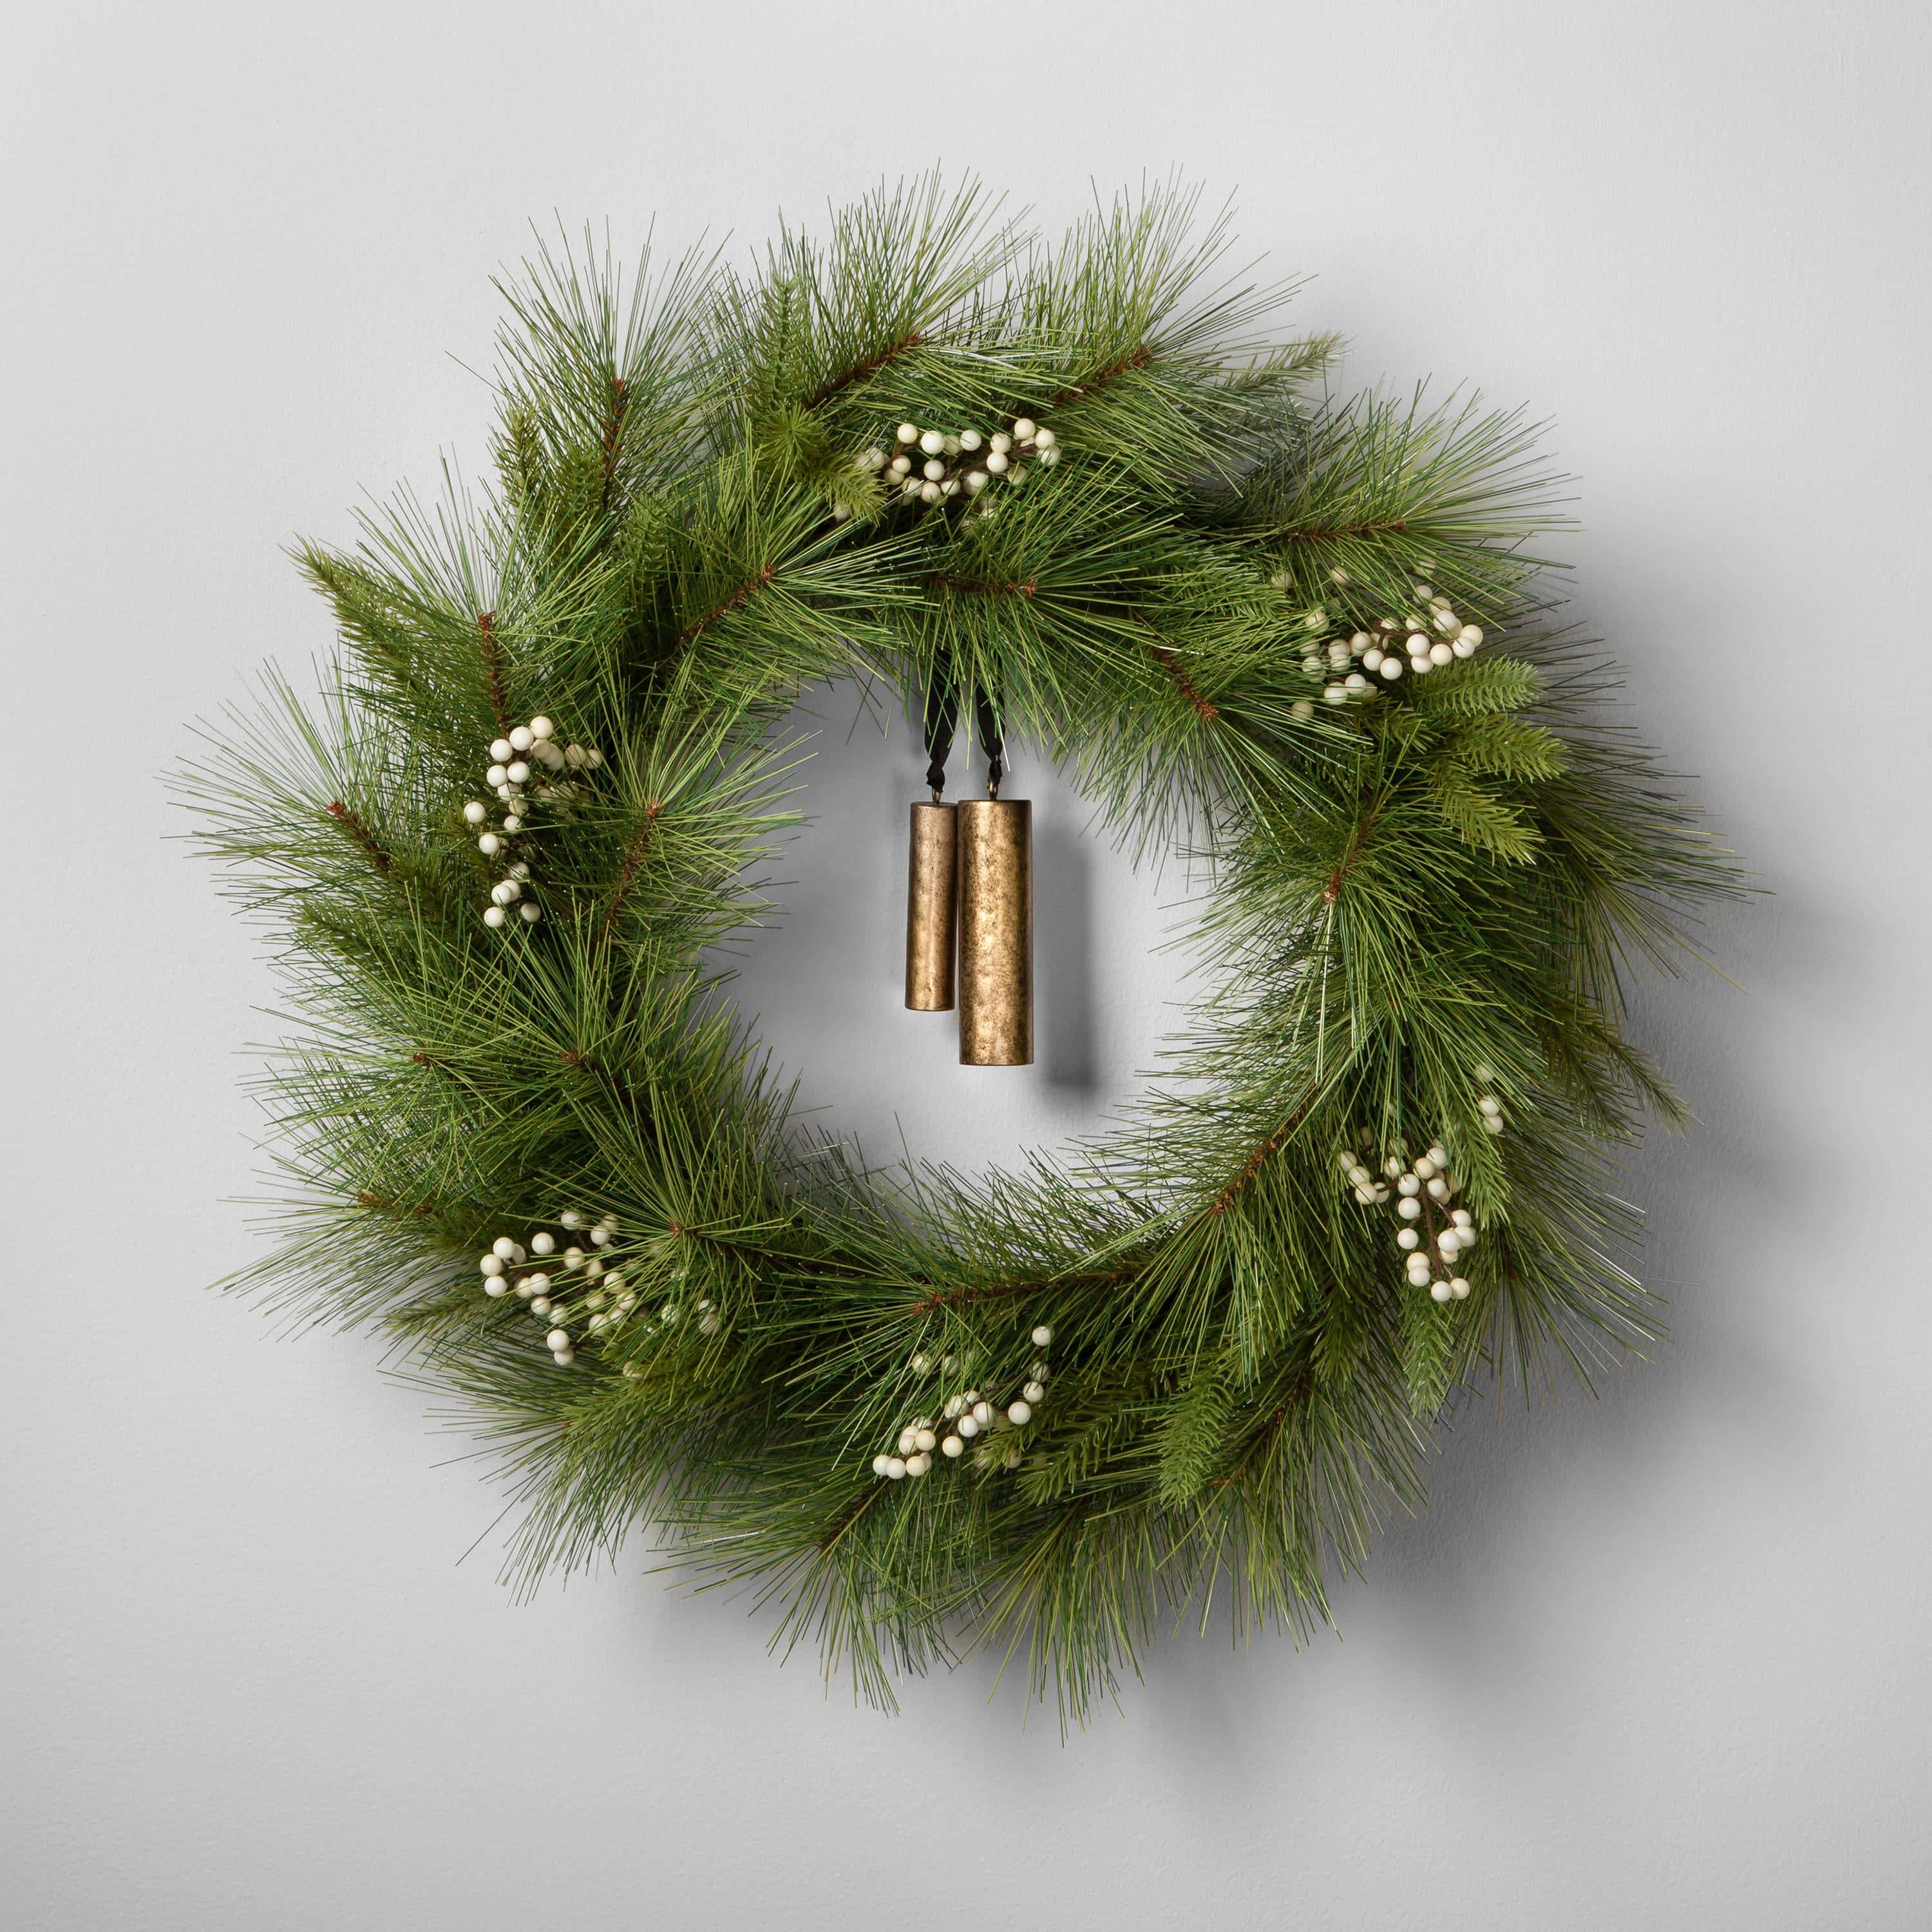 Pine wreath with white berries and a bell on the wall.